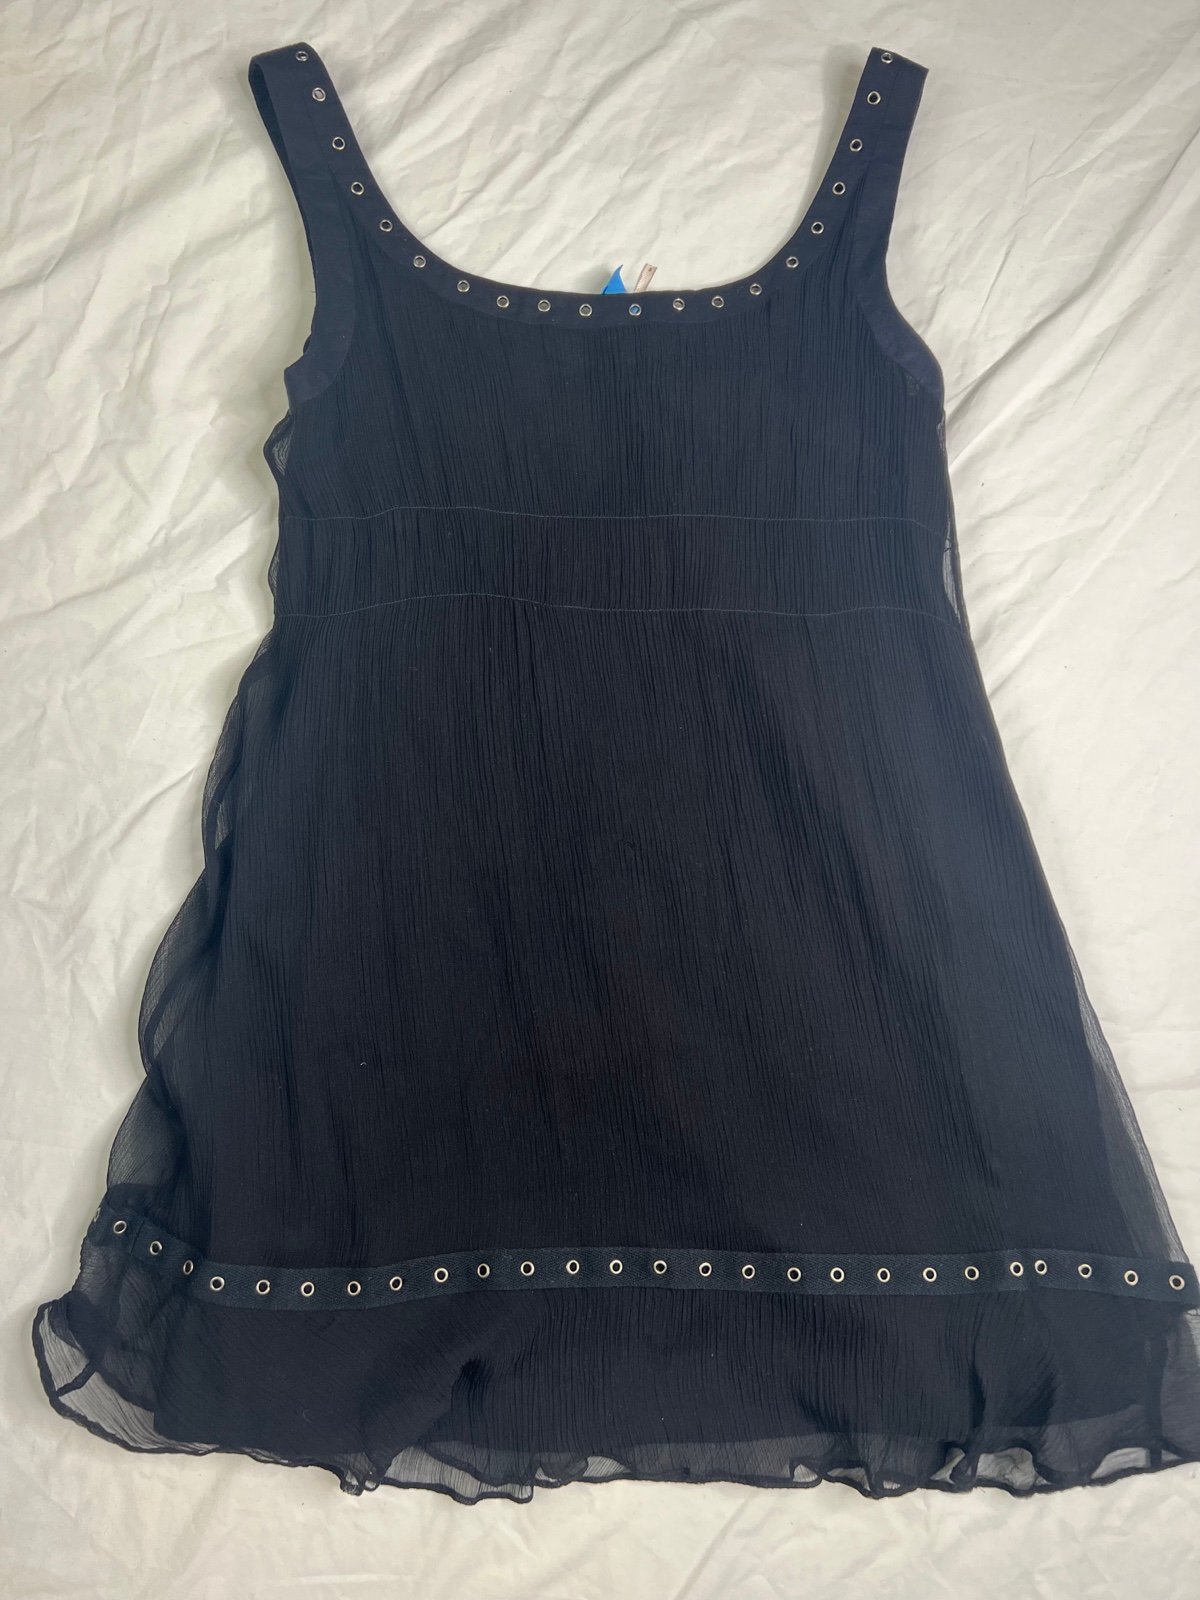 Simple Free People Top Womens Size 6 Silk Black Lined Camisole Top A030723 imBKFe6Vx Low Price